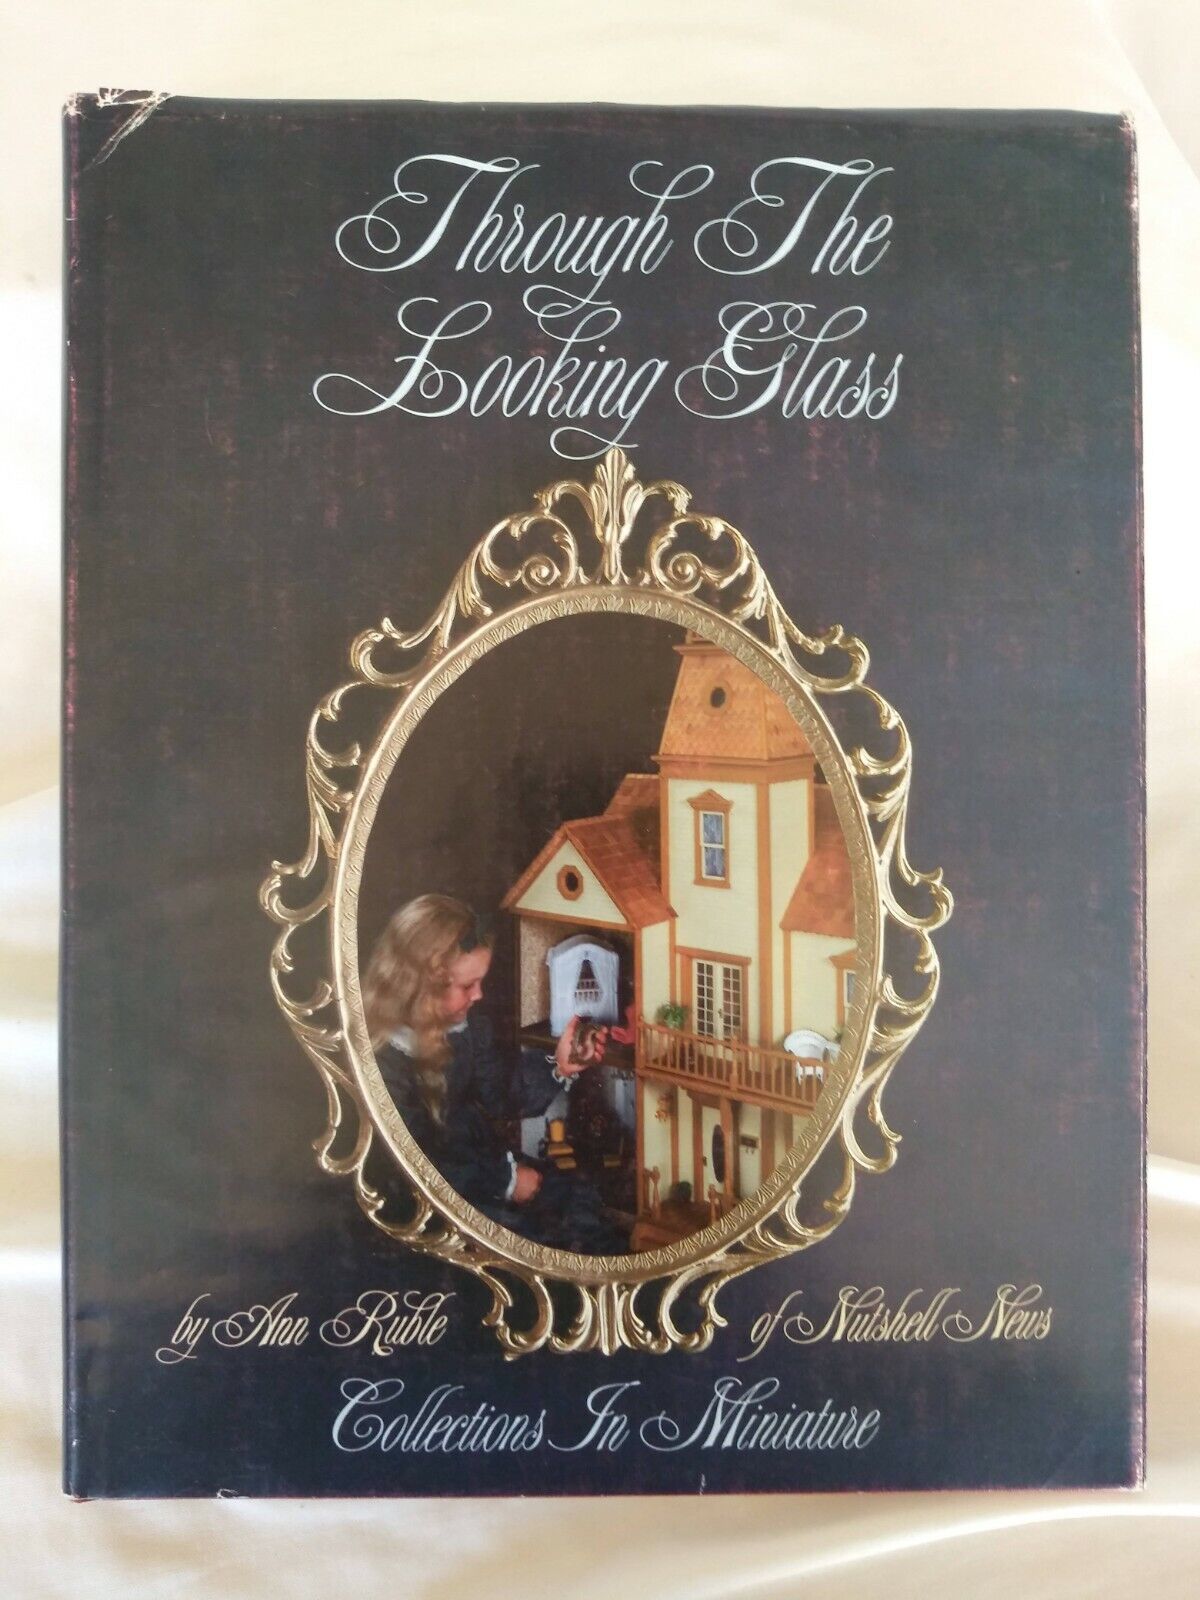 Through The Looking Glass By Ann Ruble, Collections In Miniature Signed 1984